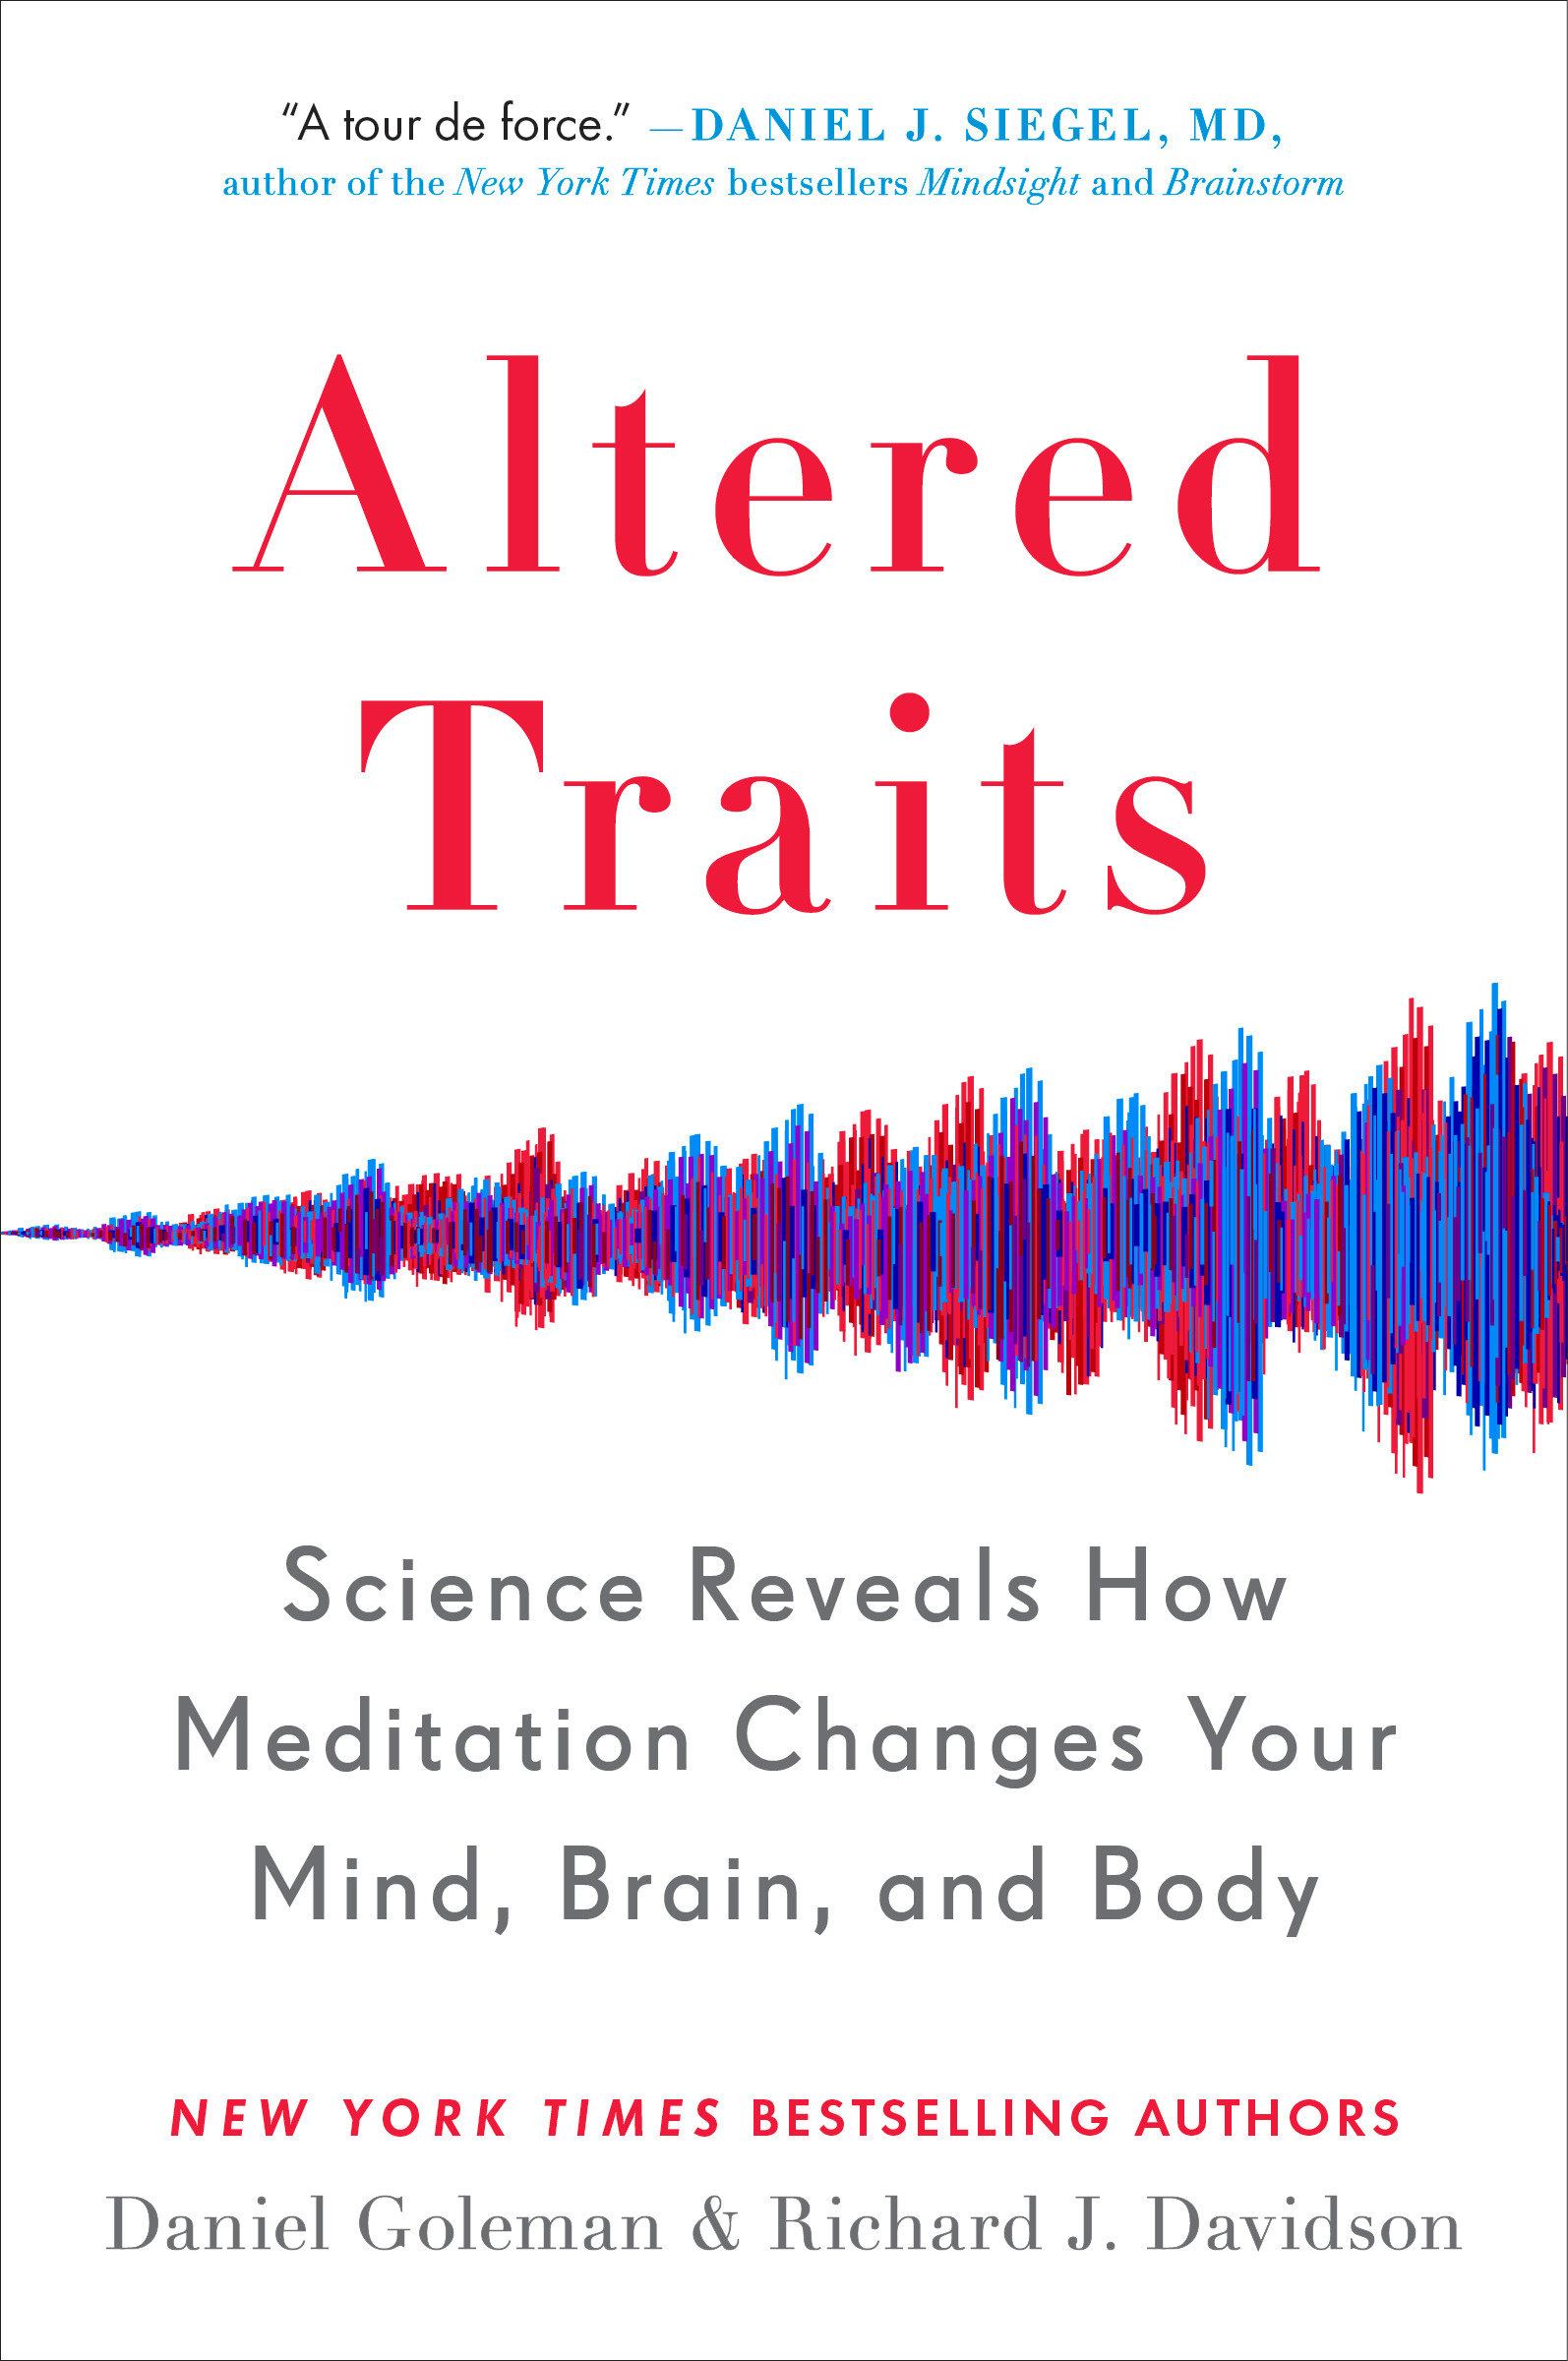 Altered Traits Science Reveals How Meditation Changes Your Mind, Brain, and Body cover image